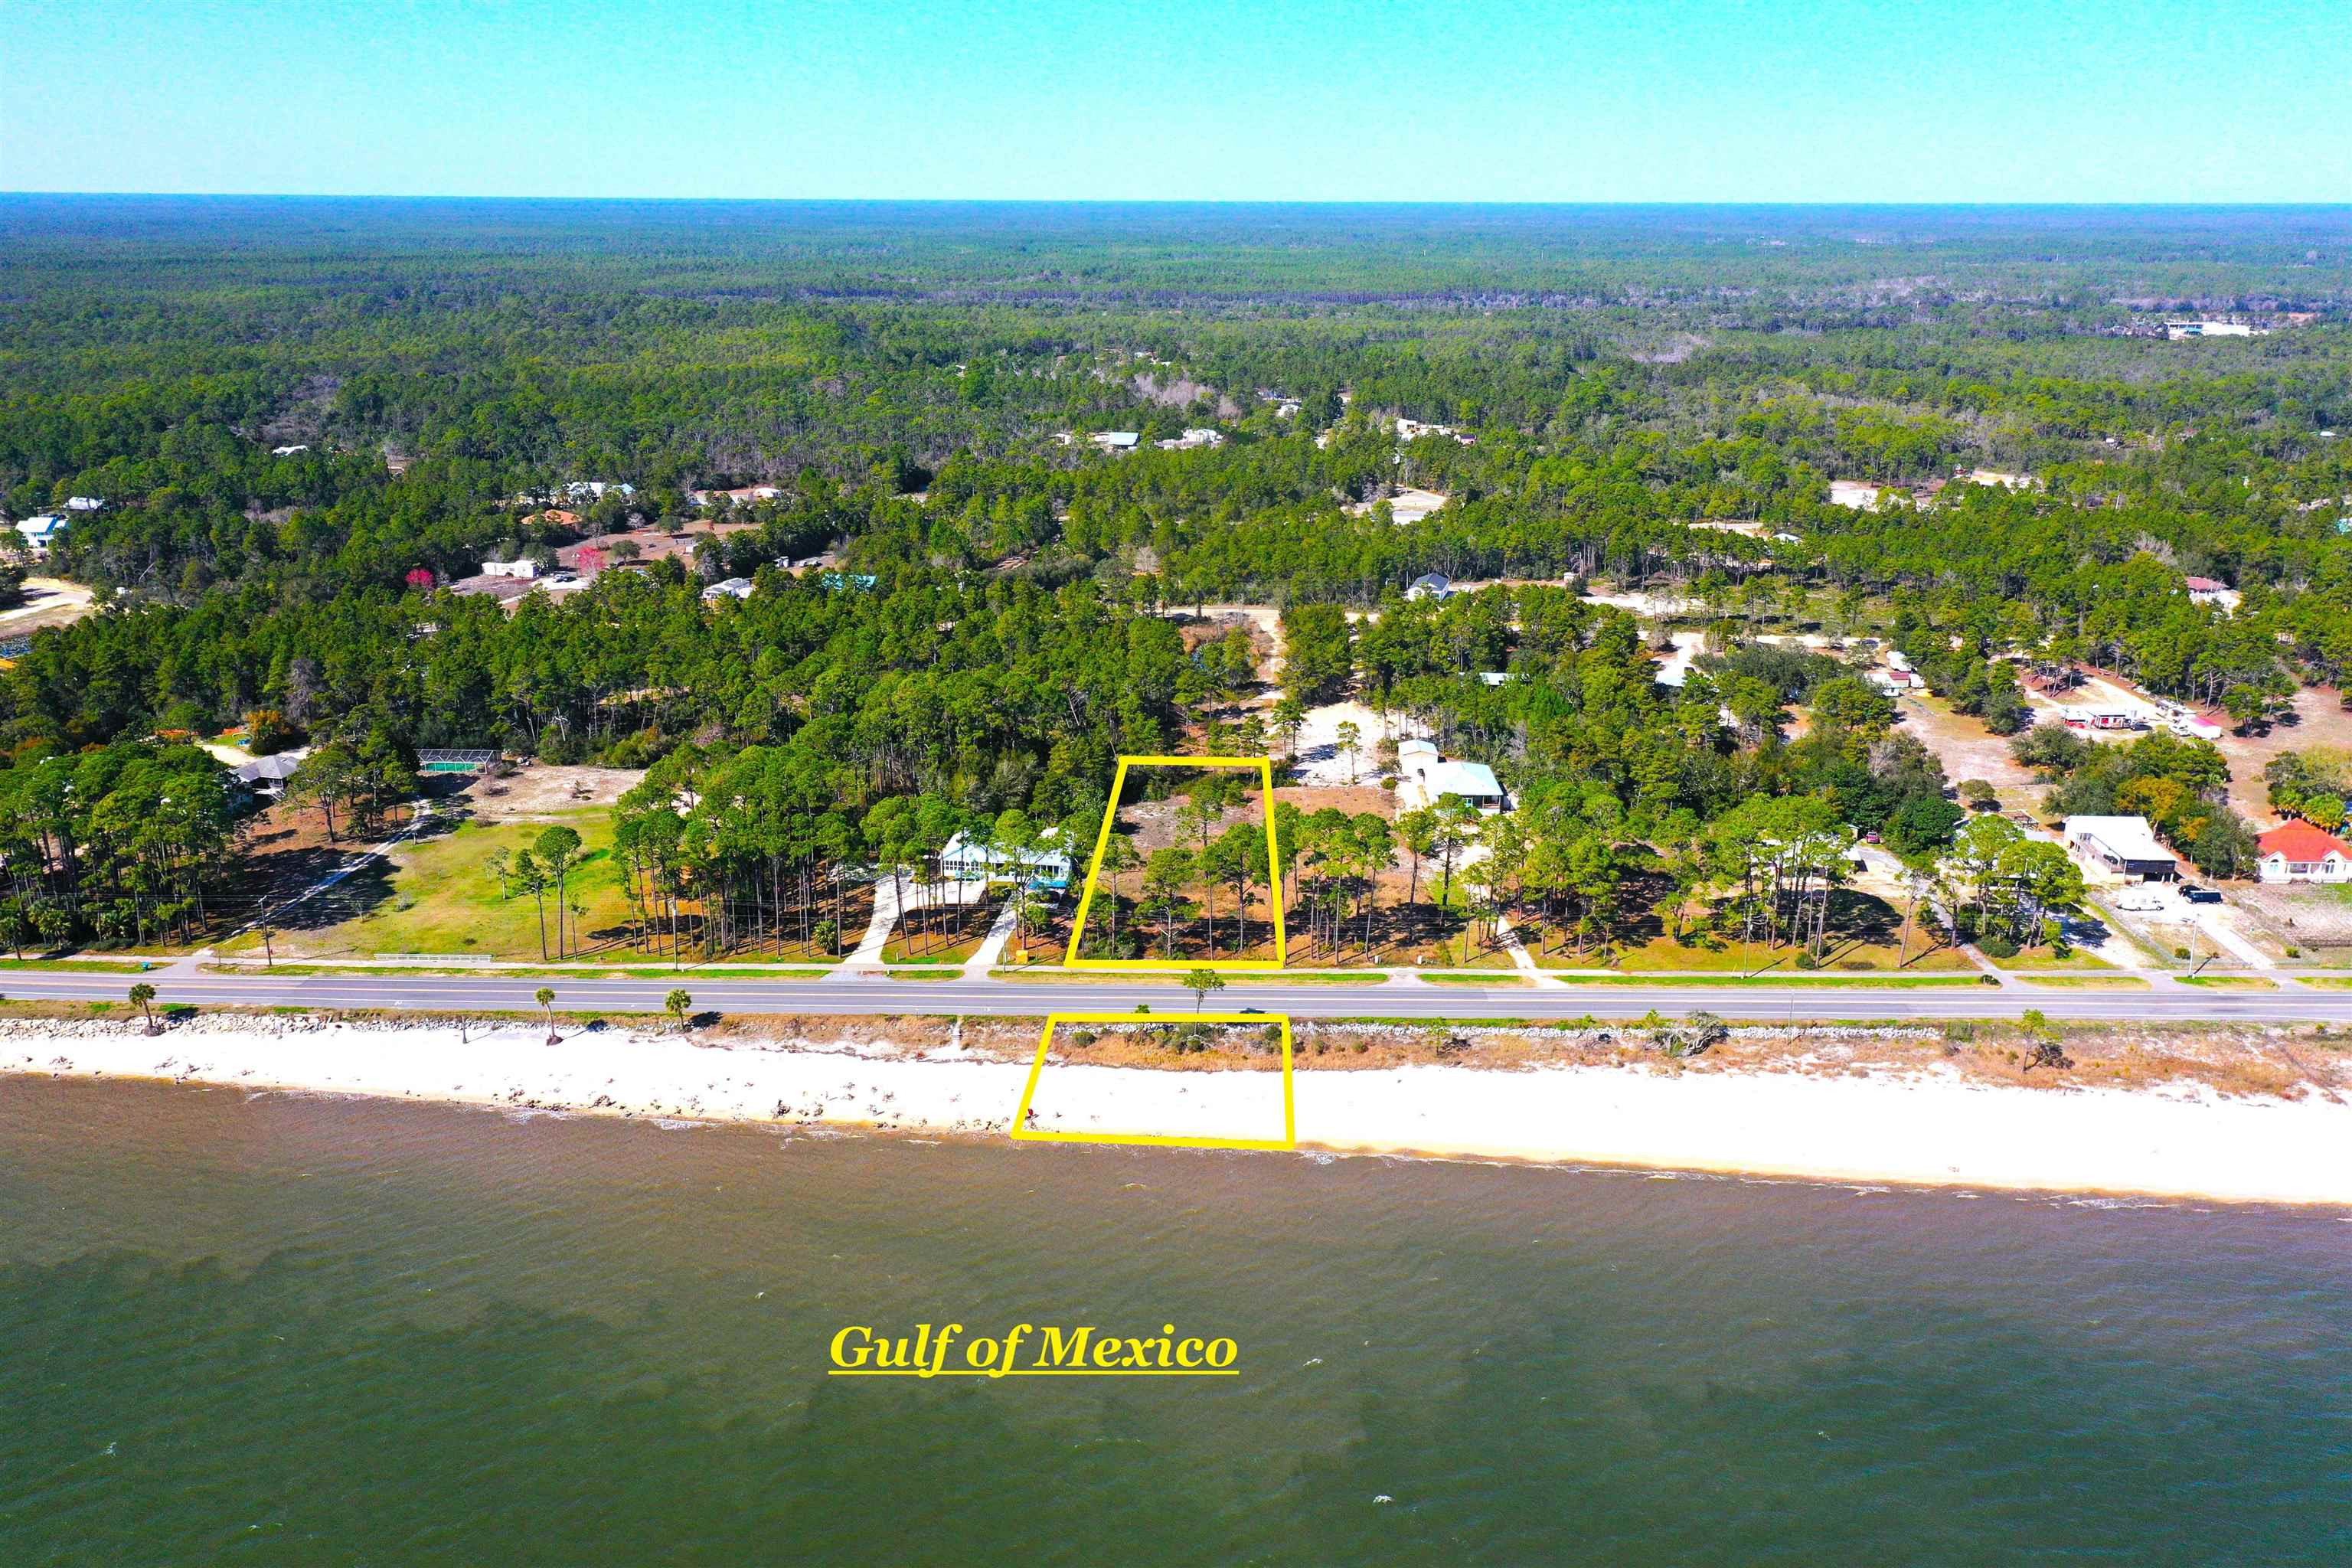 1909 Highway 98 W,CARRABELLE,Florida 32322,Lots and land,Highway 98 W,369658